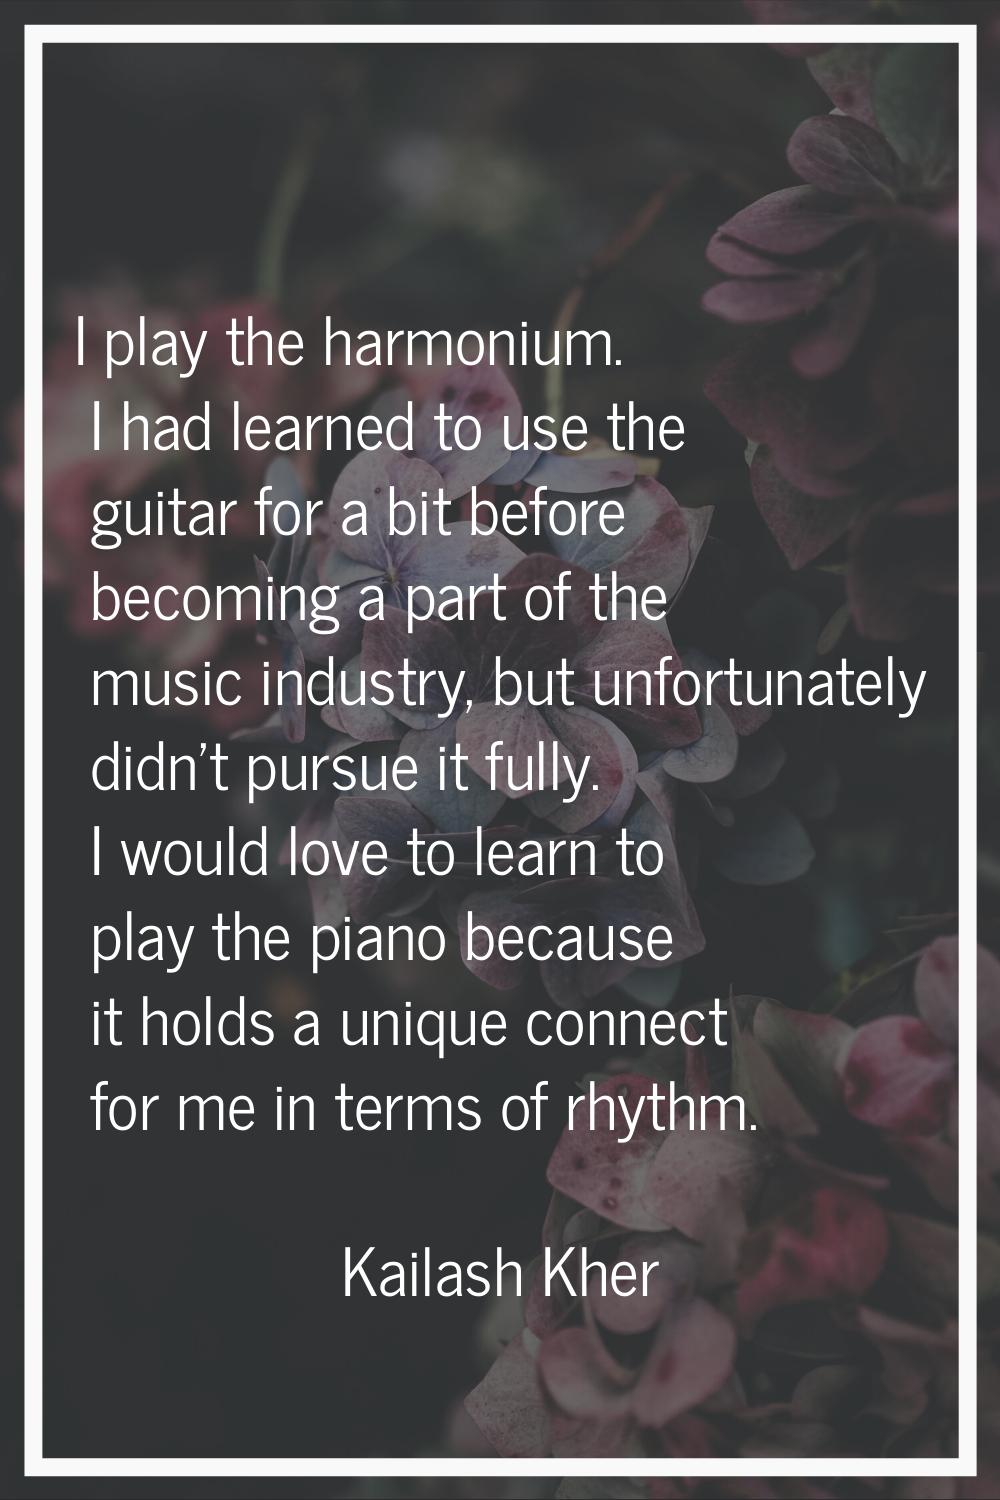 I play the harmonium. I had learned to use the guitar for a bit before becoming a part of the music